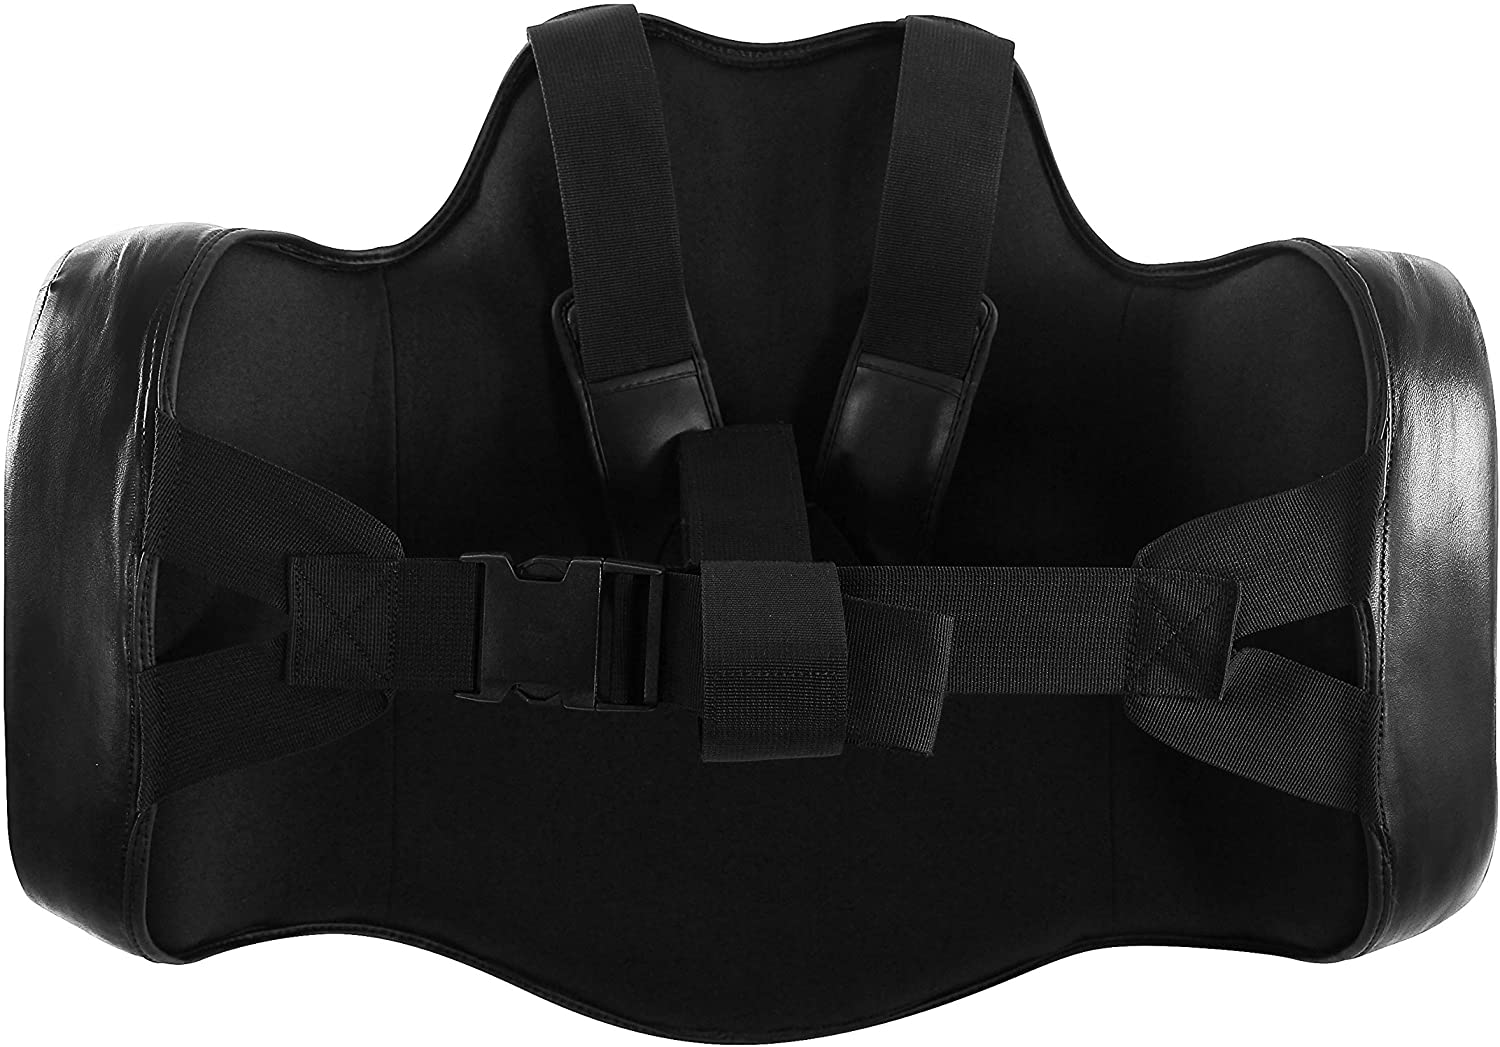 adidas Super Body Protector for Boxing Coaching